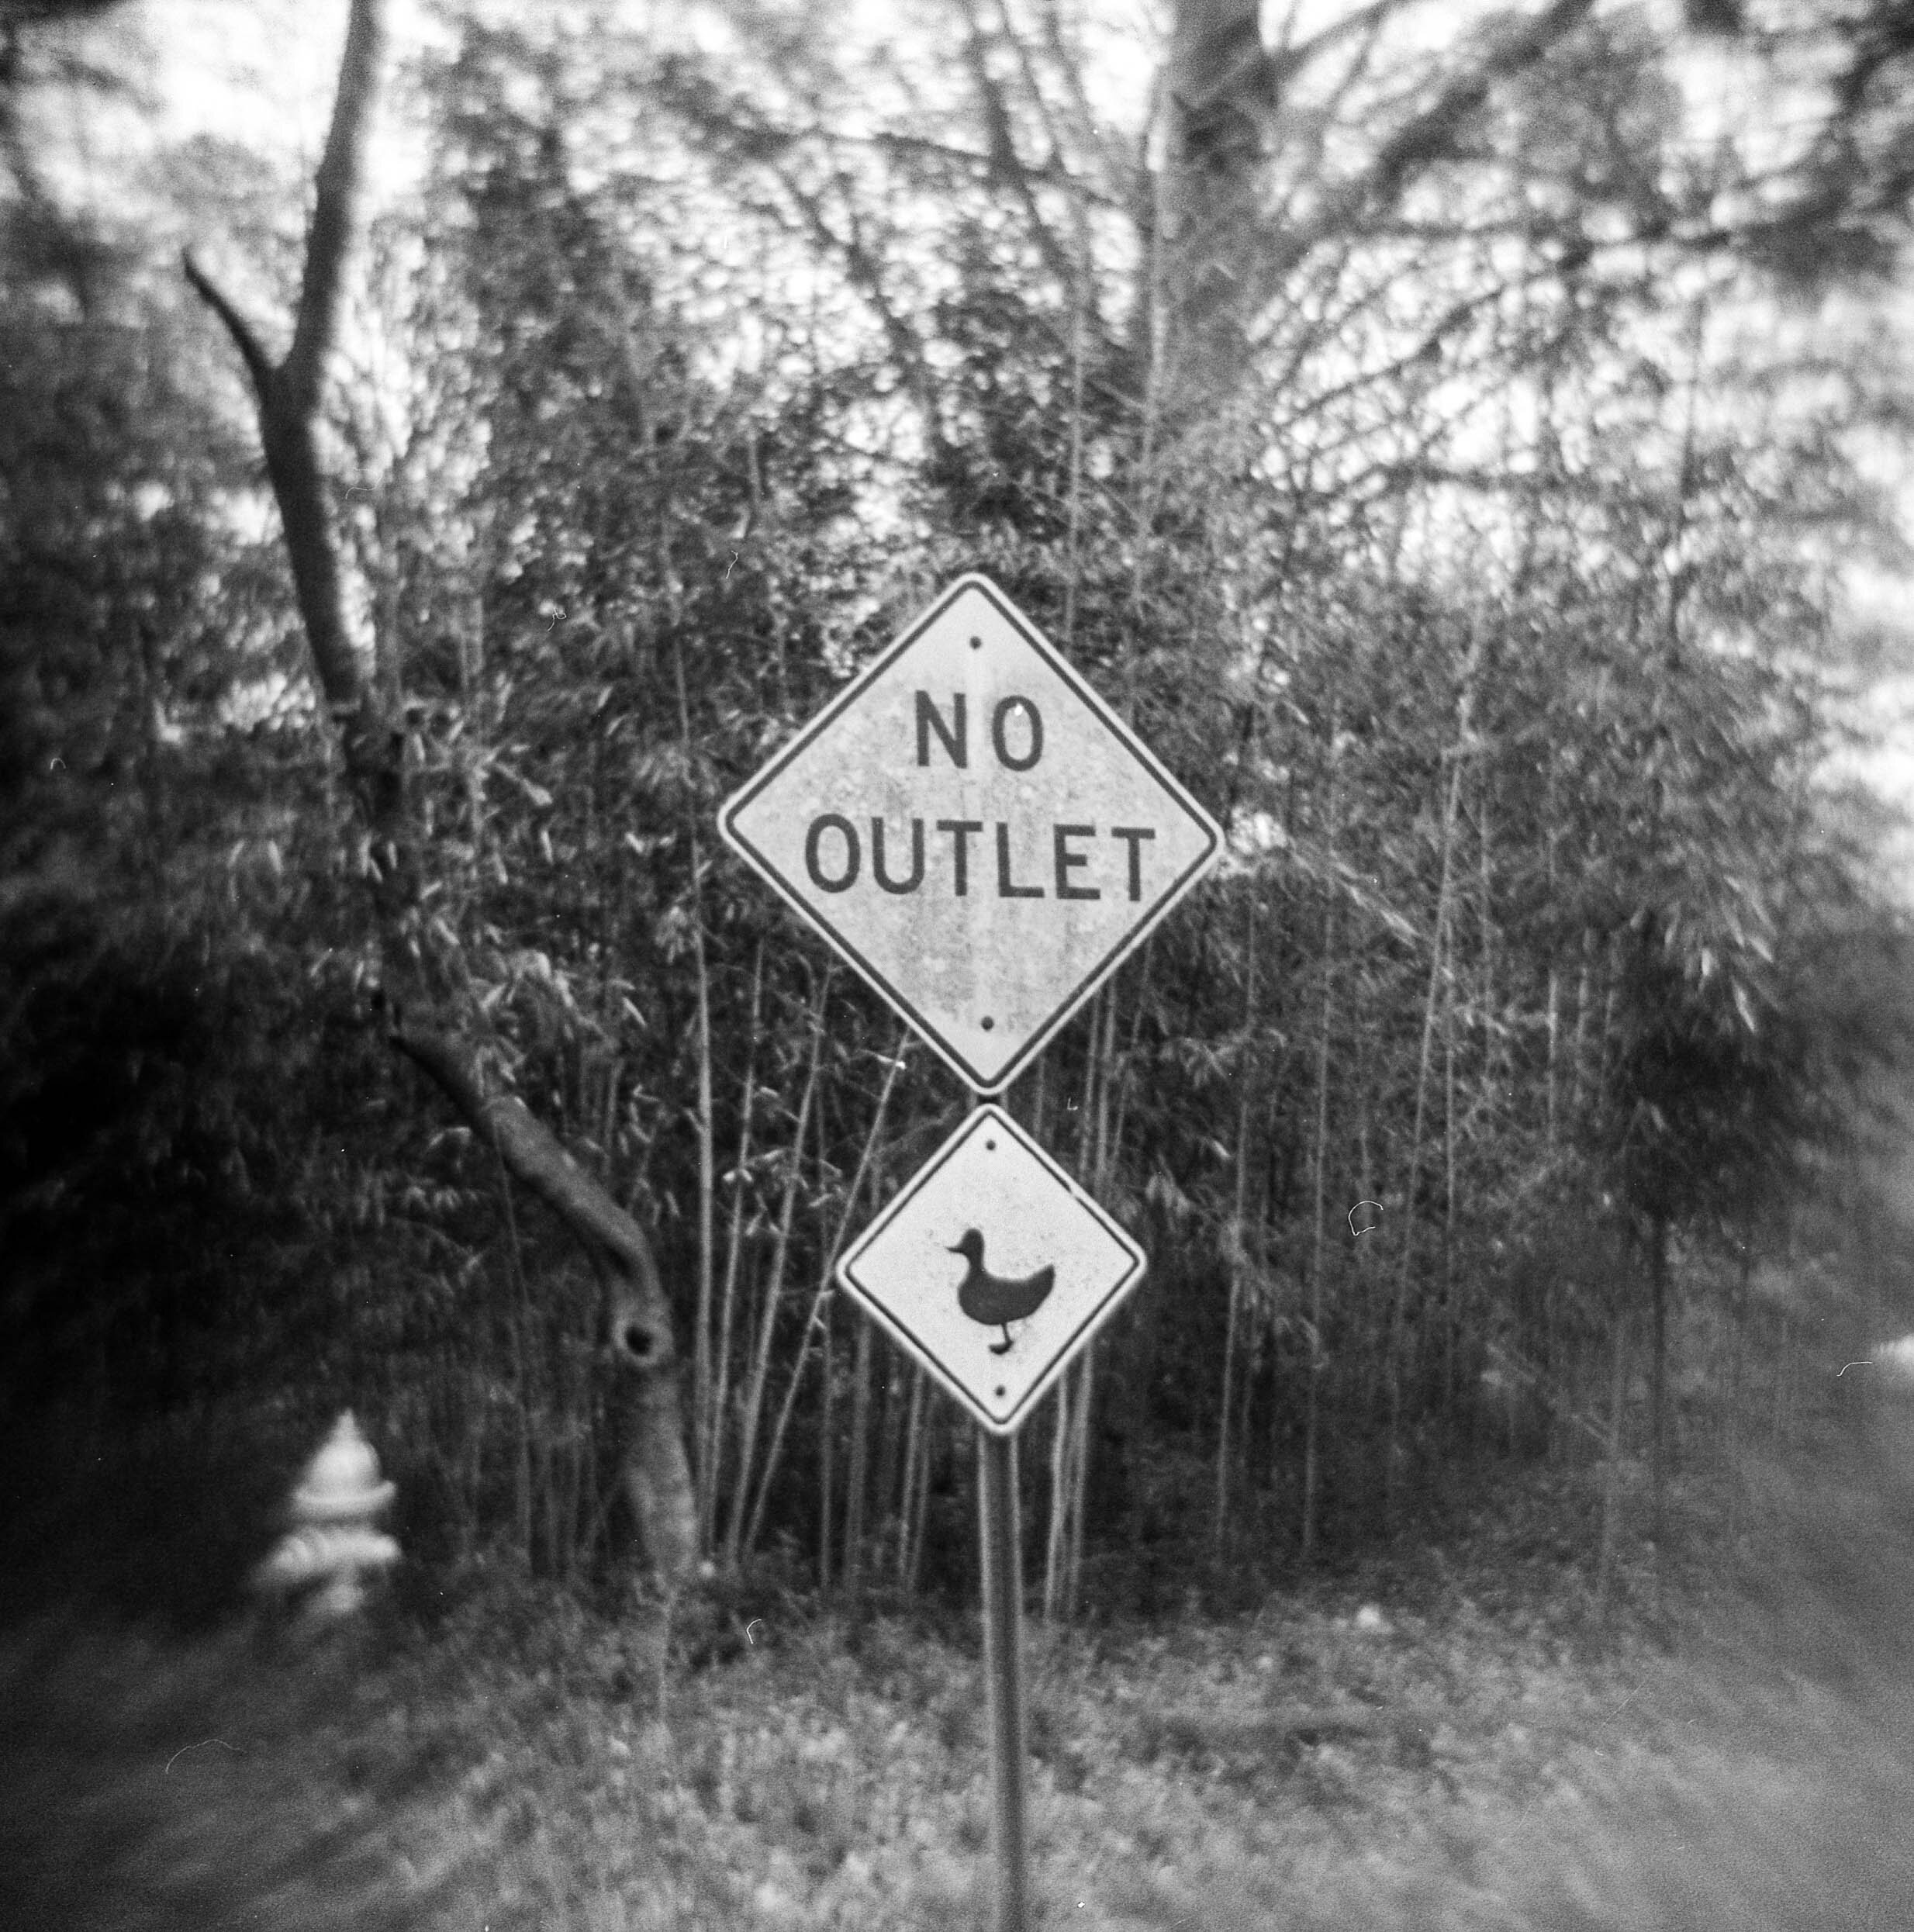 No Outlet for Ducks